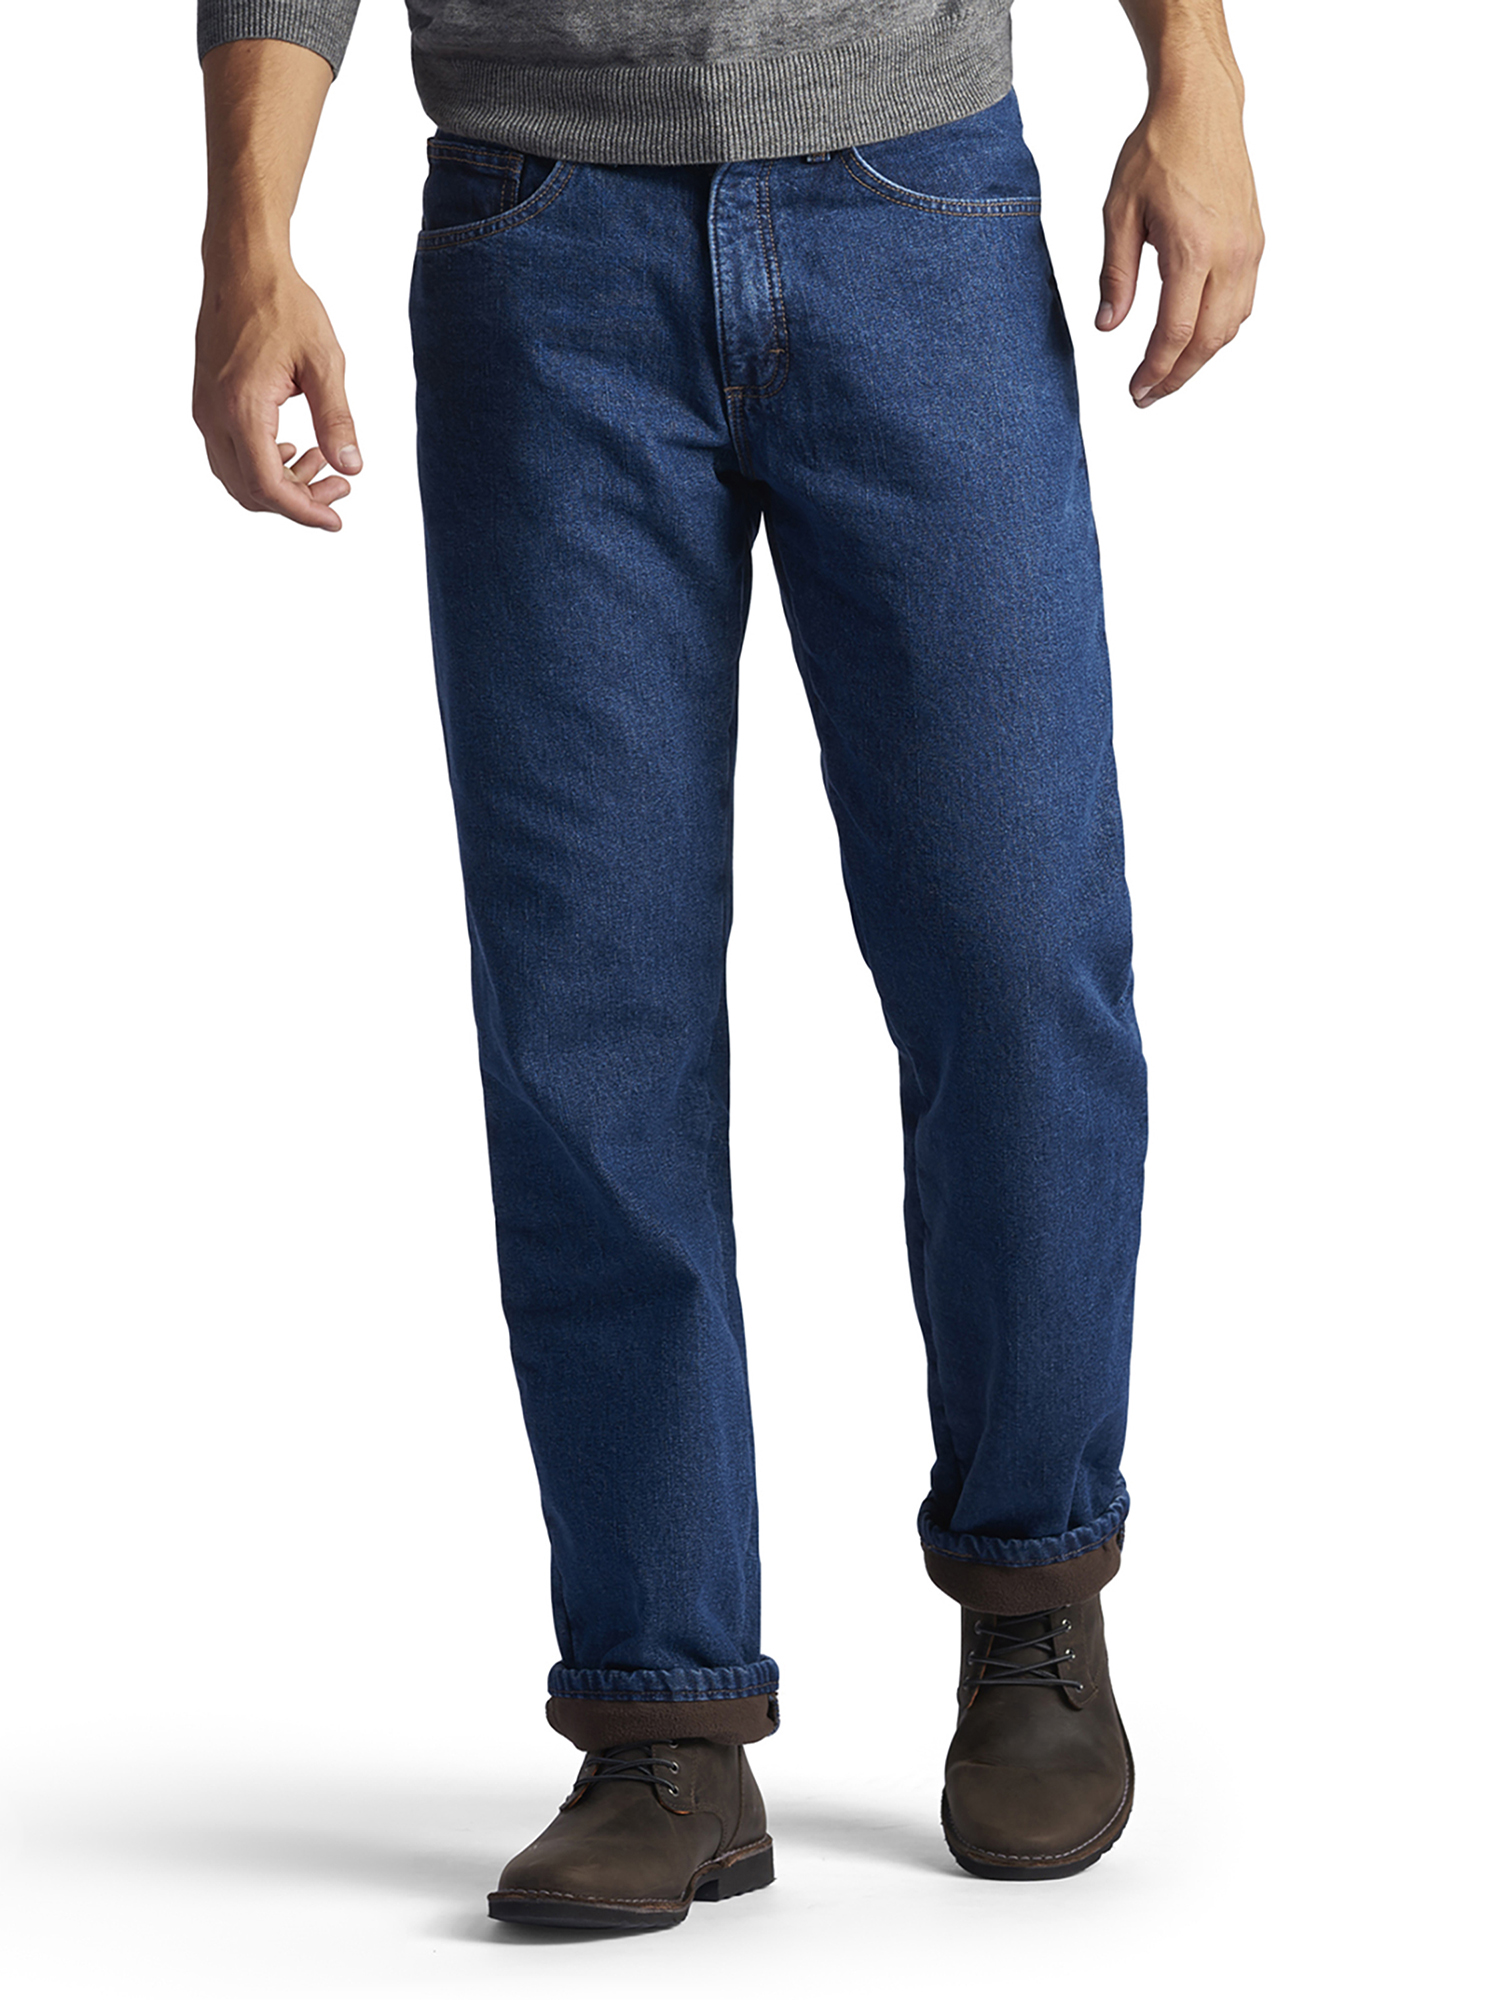 Lee Men's Relaxed Fit Fleece Lined Straight Leg Jean - image 4 of 6